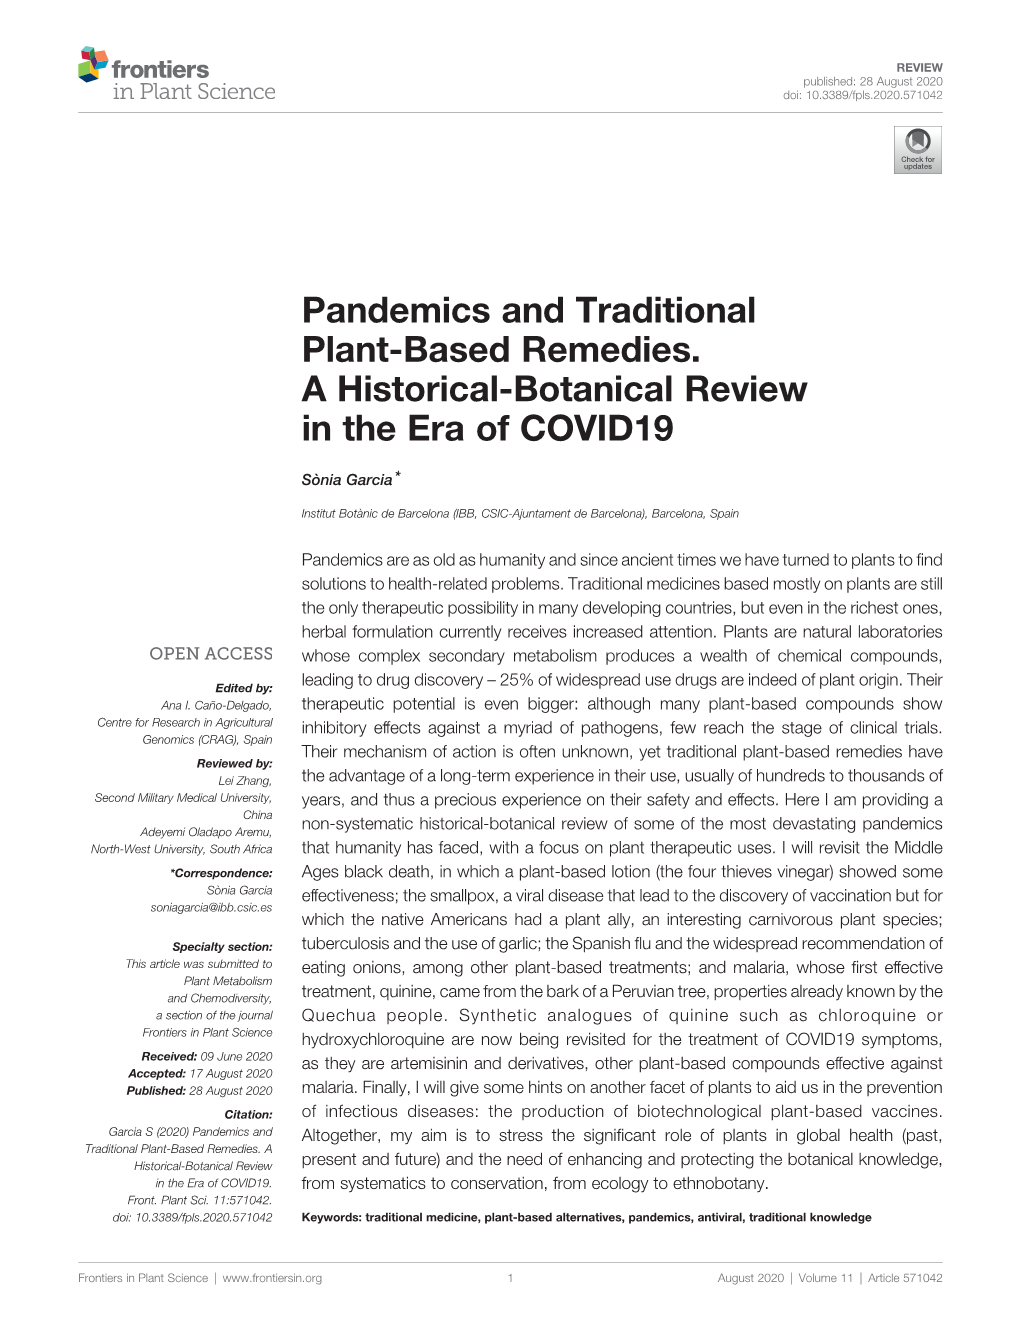 Pandemics and Traditional Plant-Based Remedies. a Historical-Botanical Review in the Era of COVID19